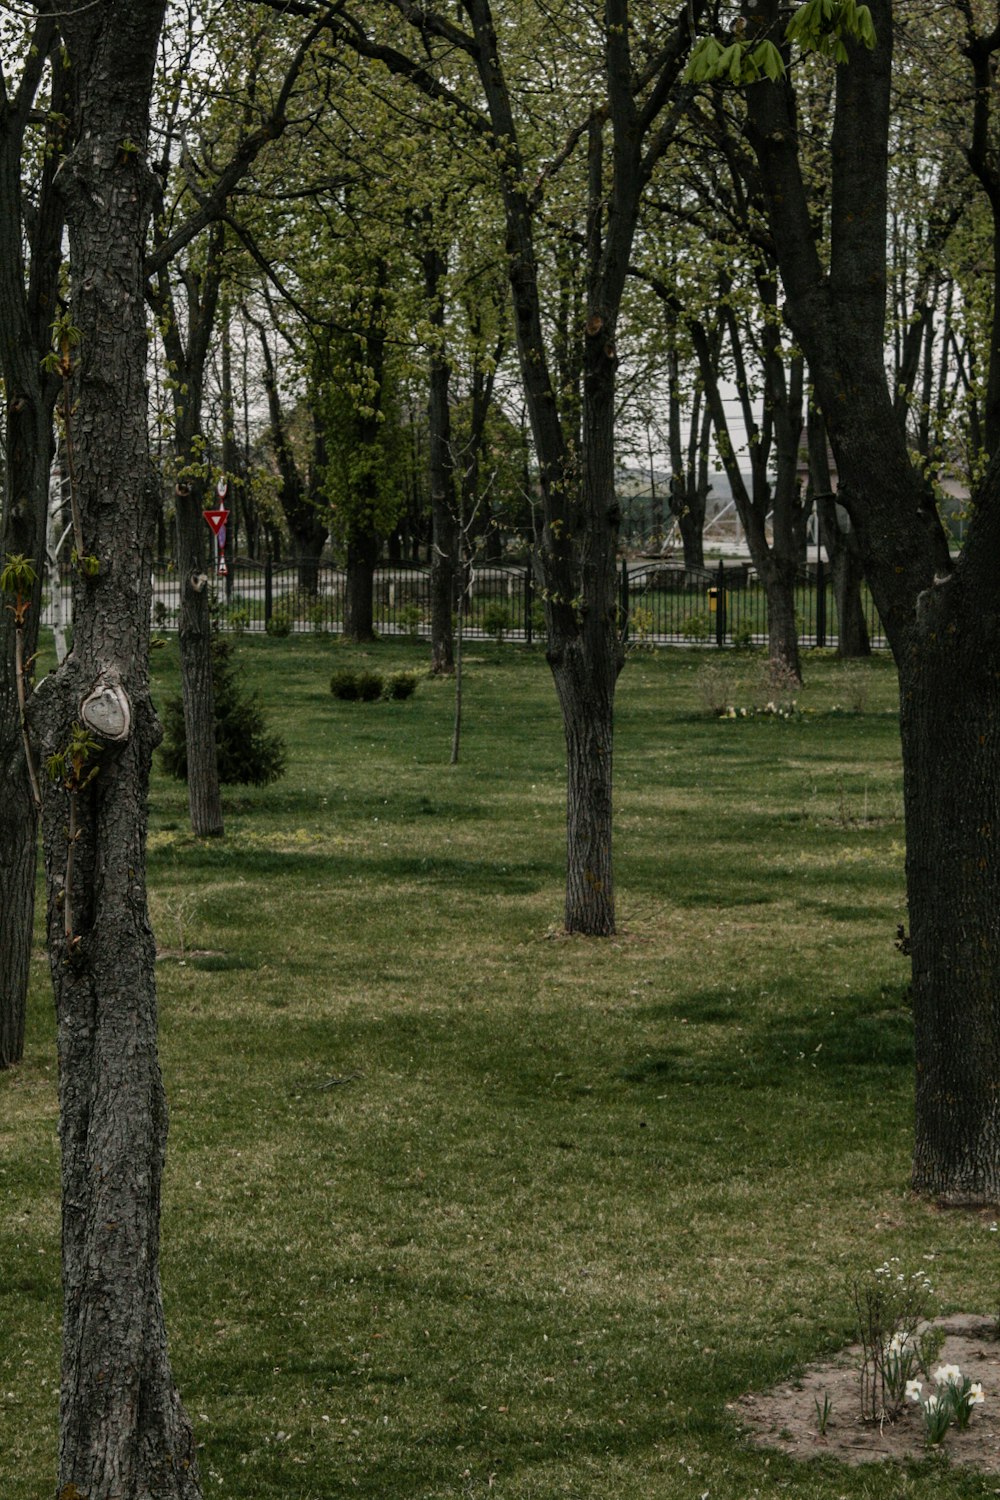 a grassy area with trees around it